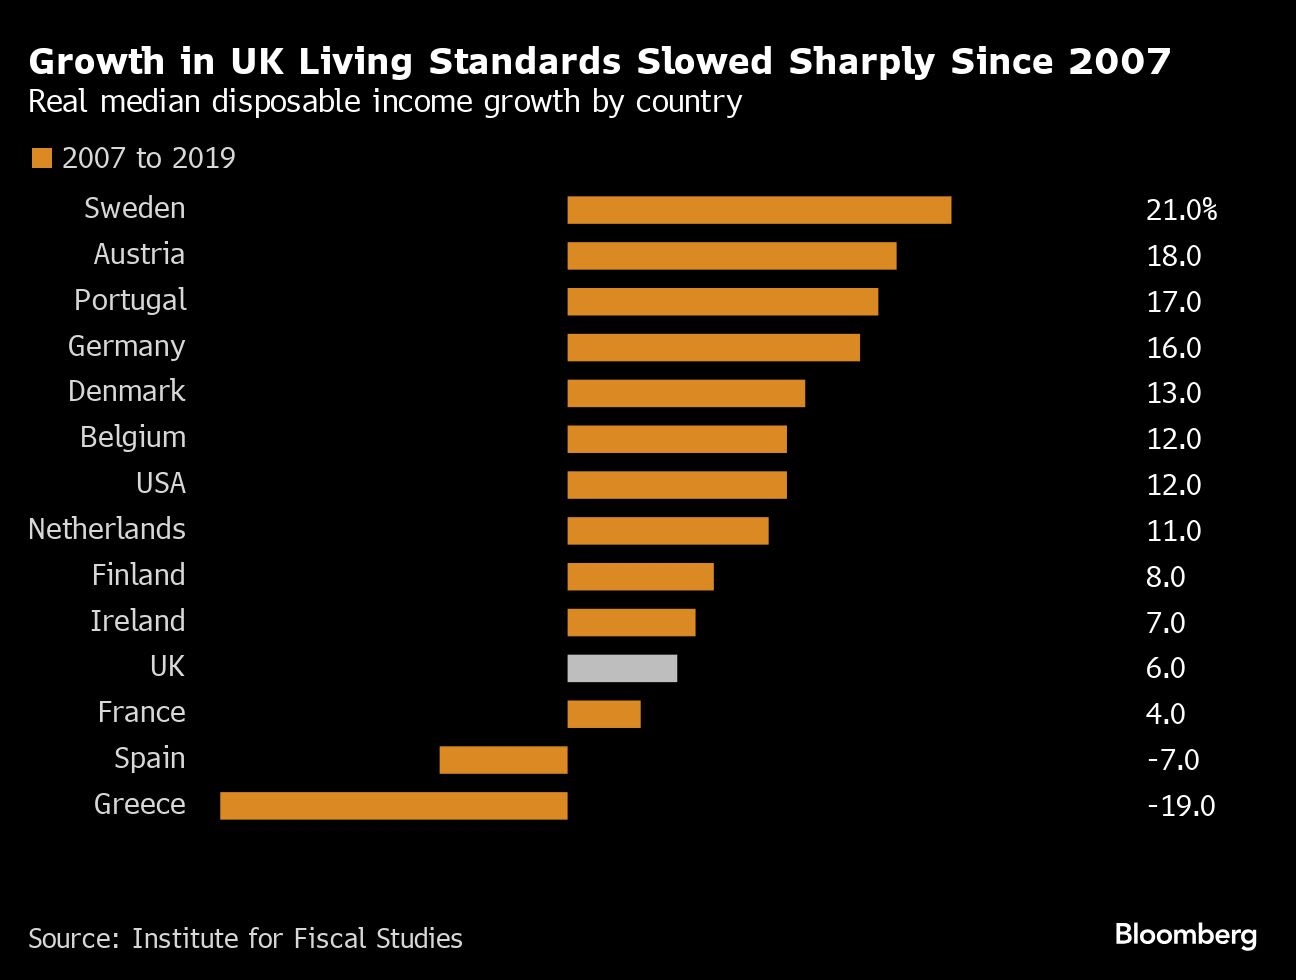 UK Living Standards Lagged Under Conservative Rule, IFS Says